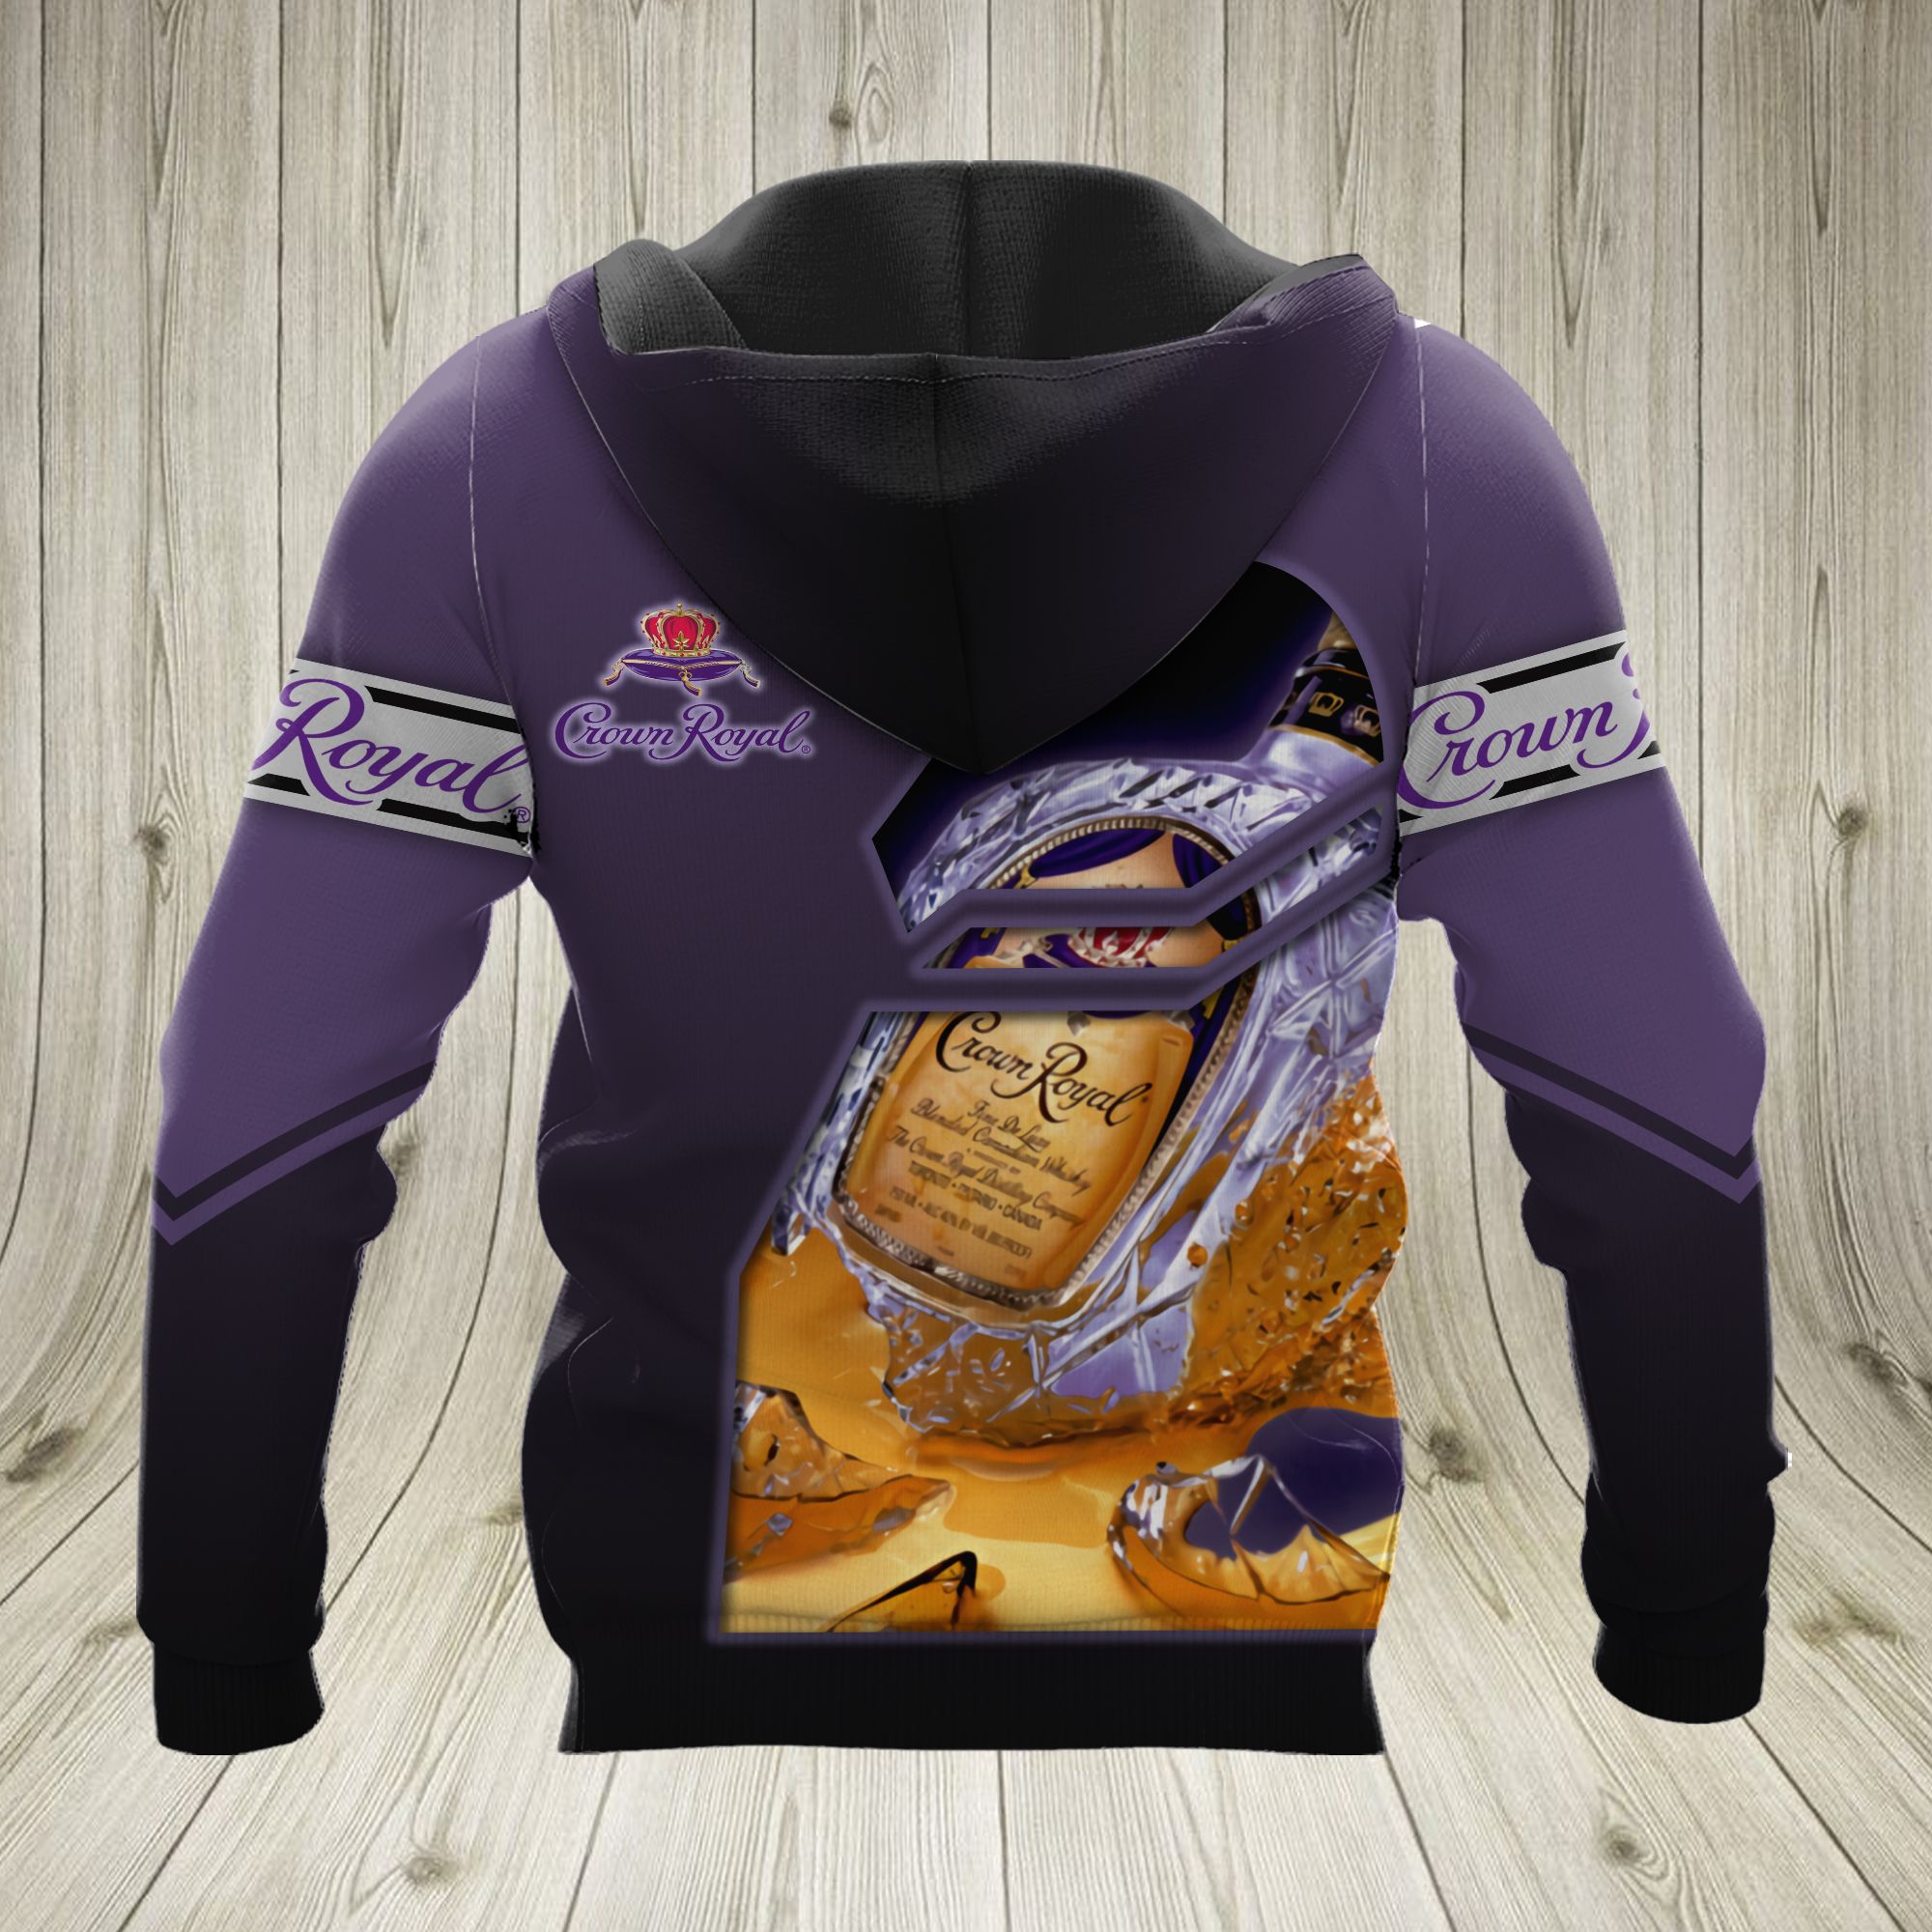 Dory Crown Royal Peach I'm never drinking again 3d hoodie 12